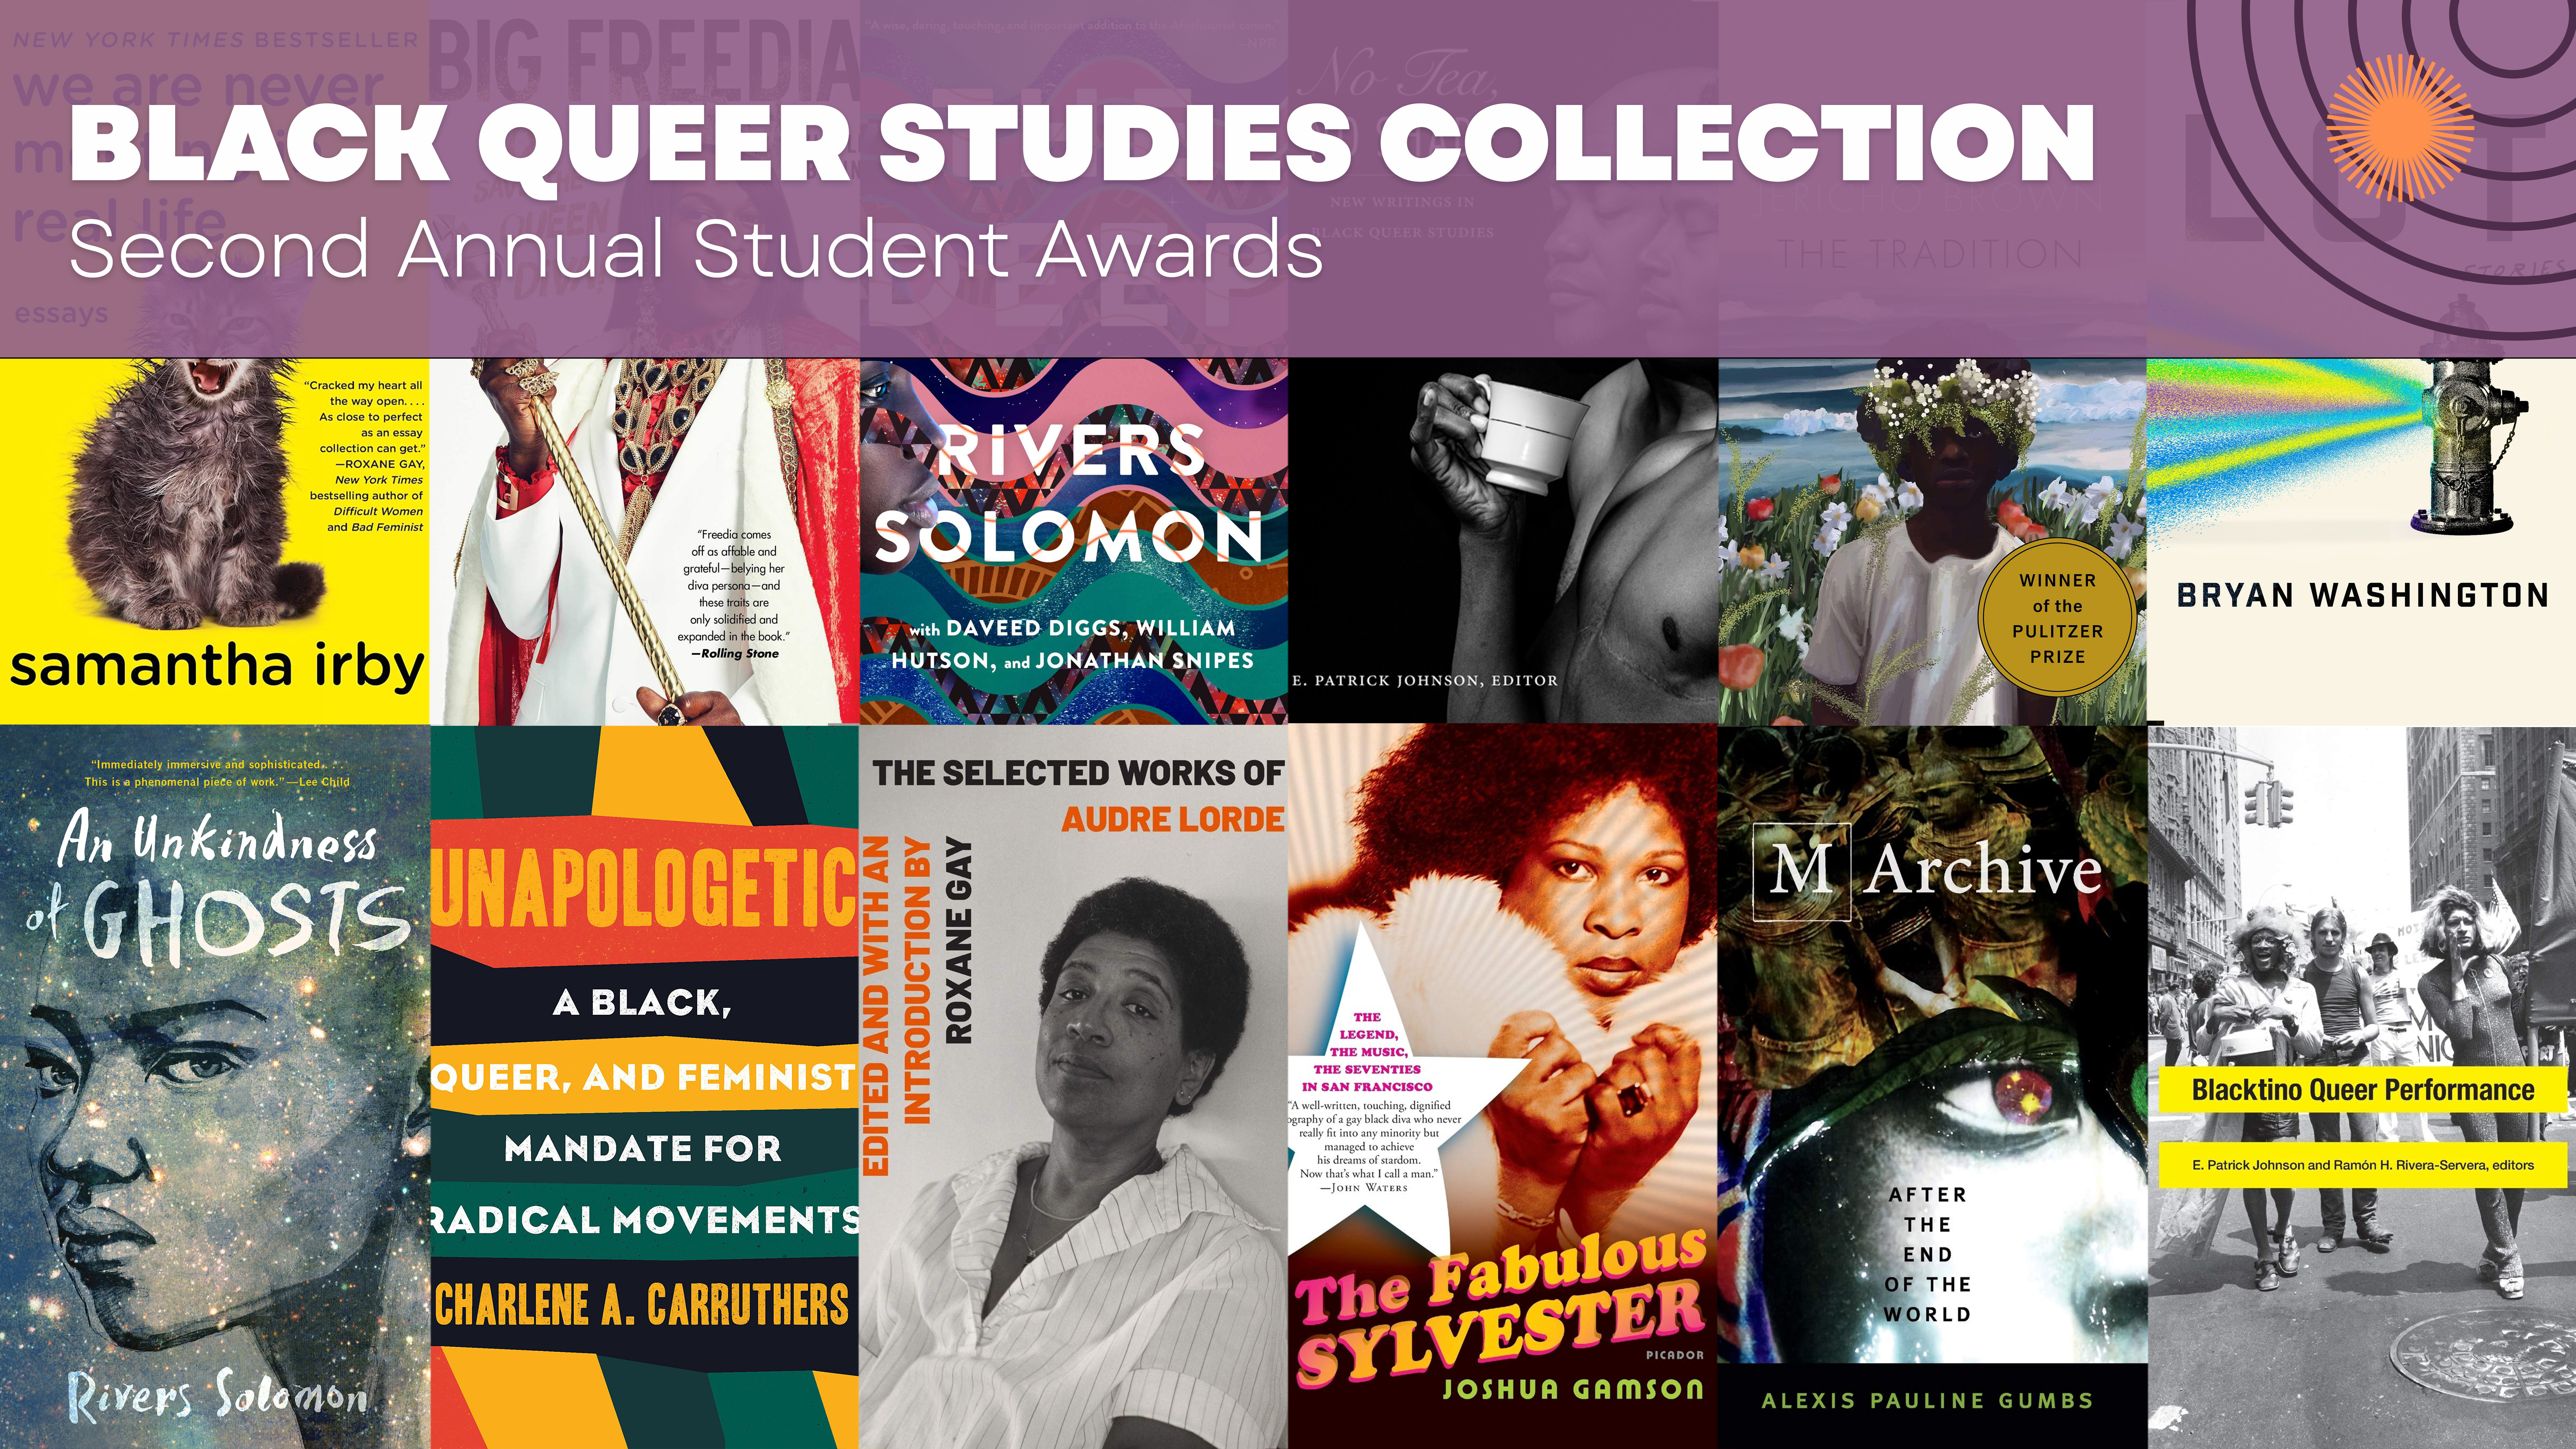 two rows of black queer title covers in rectangular shape with purple banner overlay that includes "Black Queer Studies Collection" in text